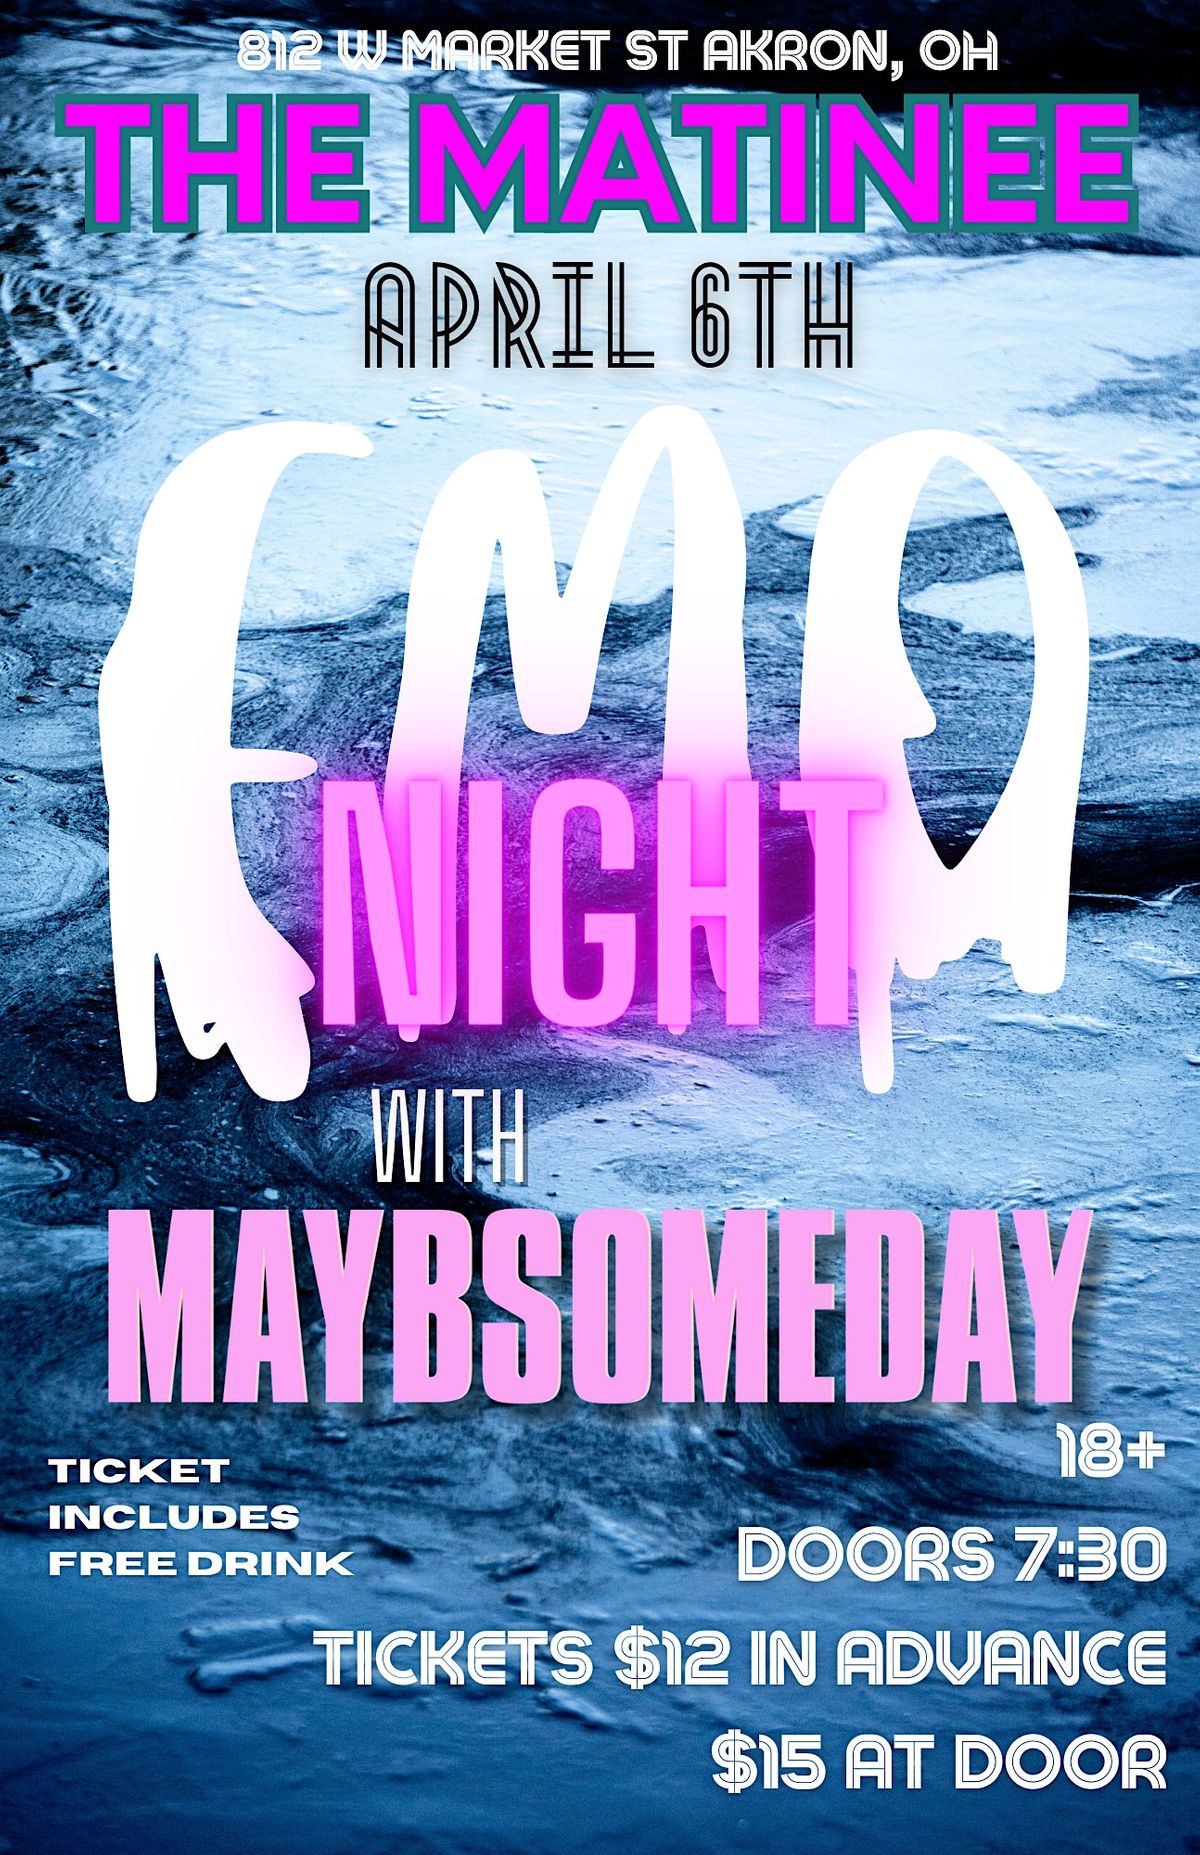 Emo Night With Maybsomeday